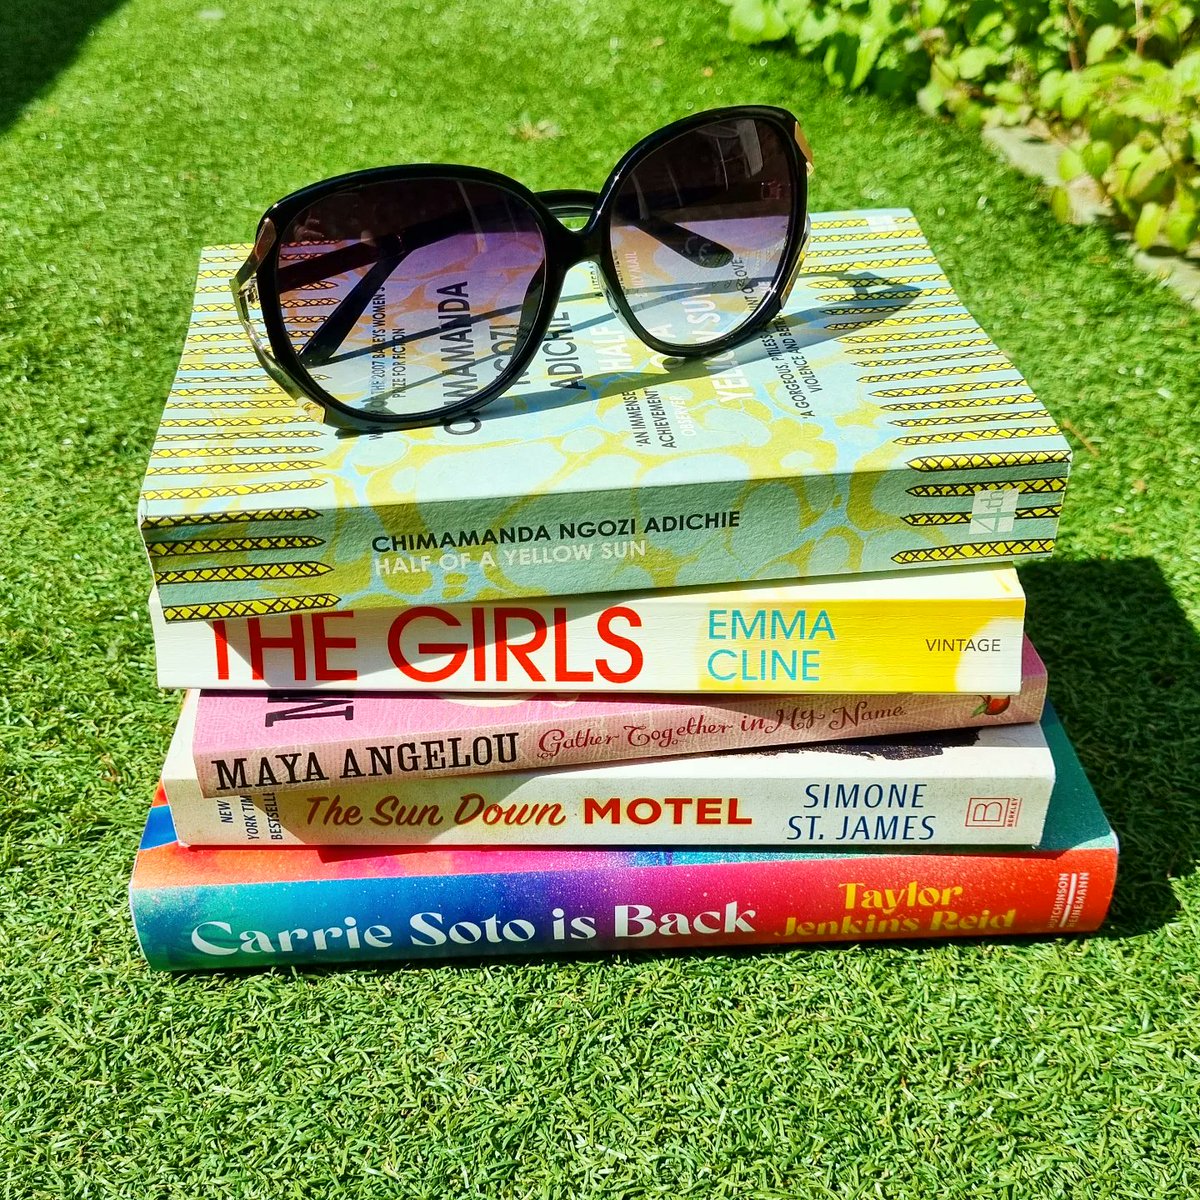 ☀️ Summer TBR ☀️
June has arrived! So here are 5 books I think will make perfect summer reads this year! 😎
Have you read any of these? 📚
#booktwt #books #bookblog #bookish #reading #bookblogger 
#BOTWxBS #BookSparks #summer #summerreading #sunny #garden #tbr #bookstack